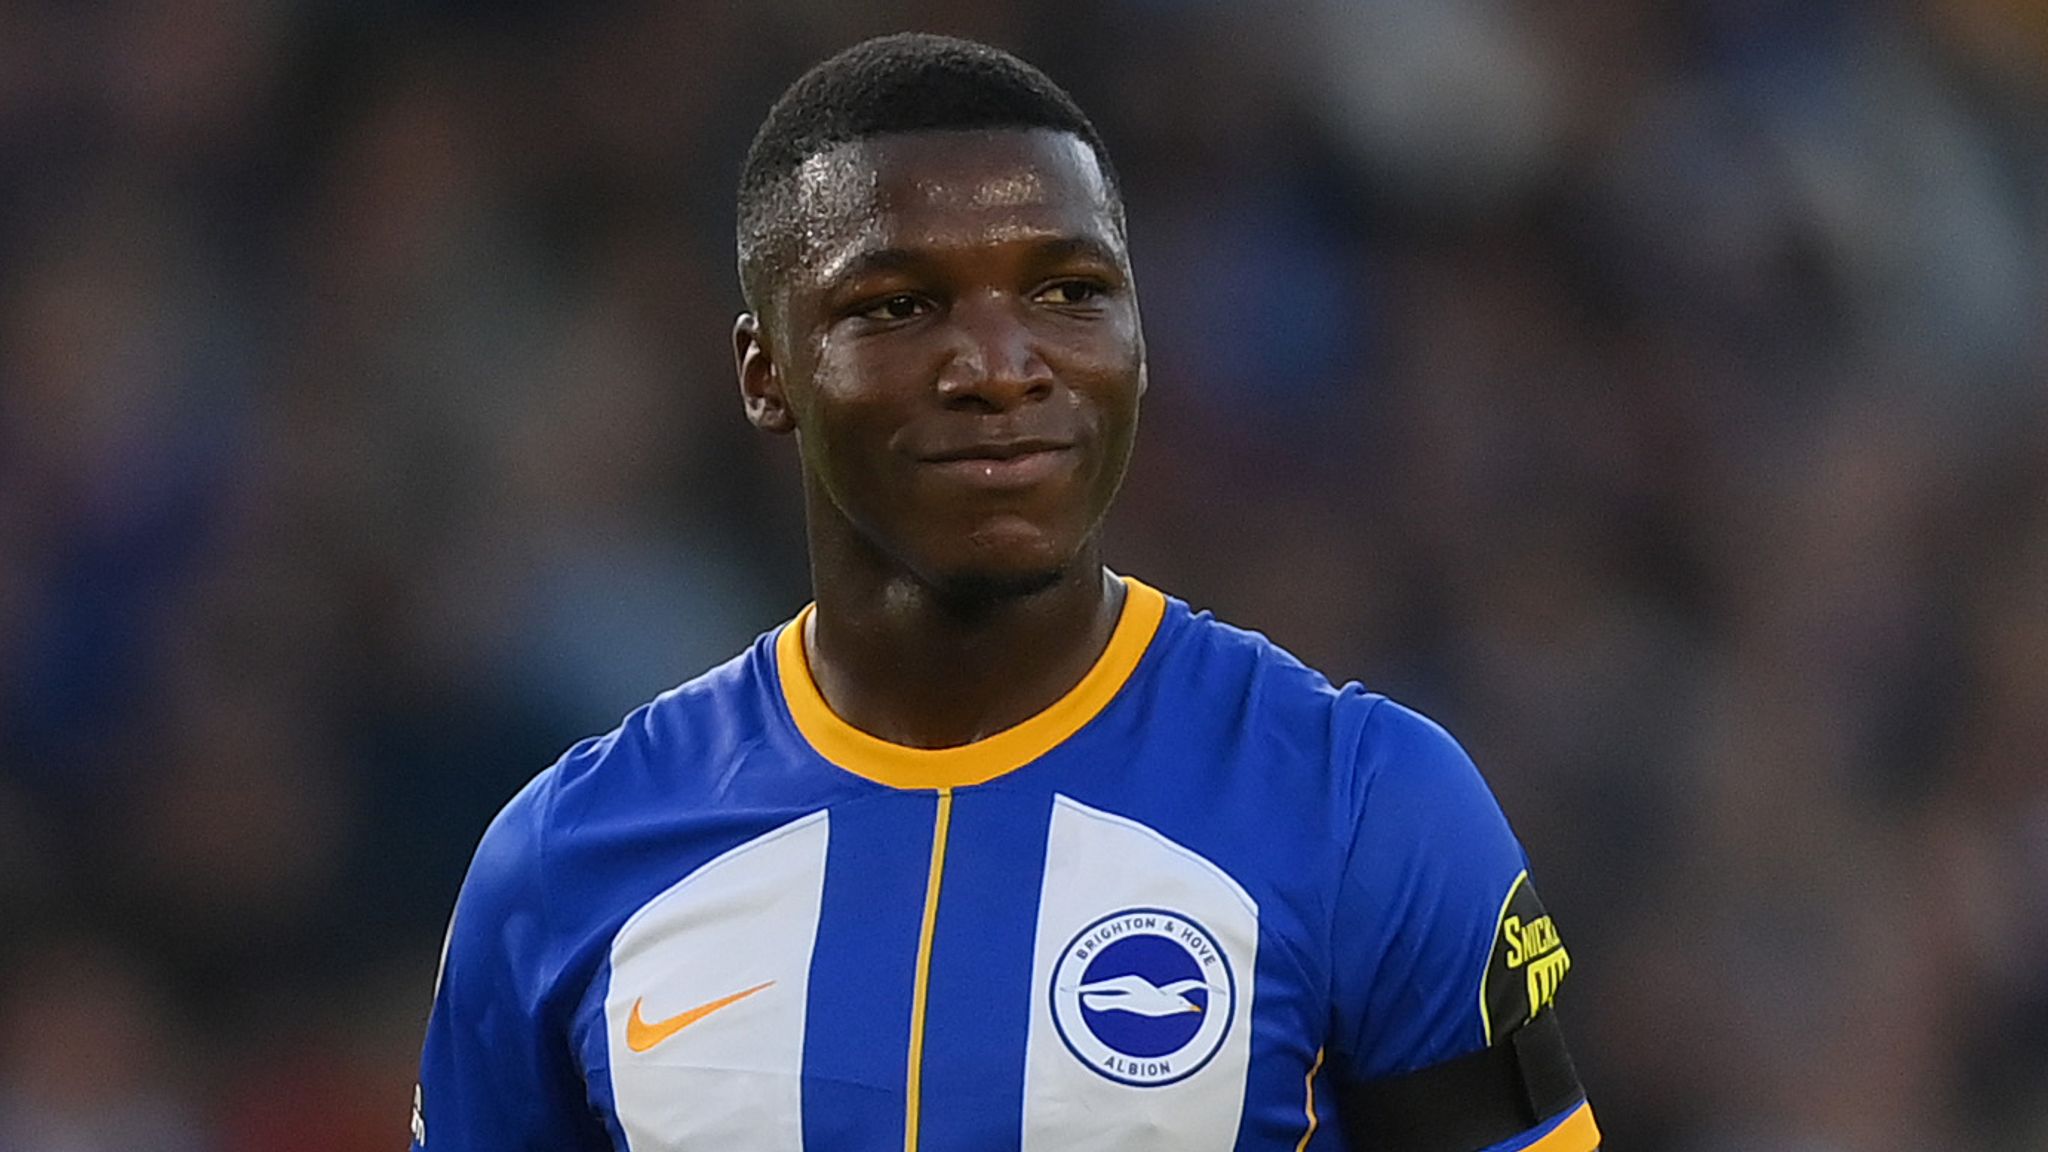 Moises Caicedo: Liverpool remain in talks with Brighton but Reds expect midfielder to make Chelsea move | Football News | Sky Sports